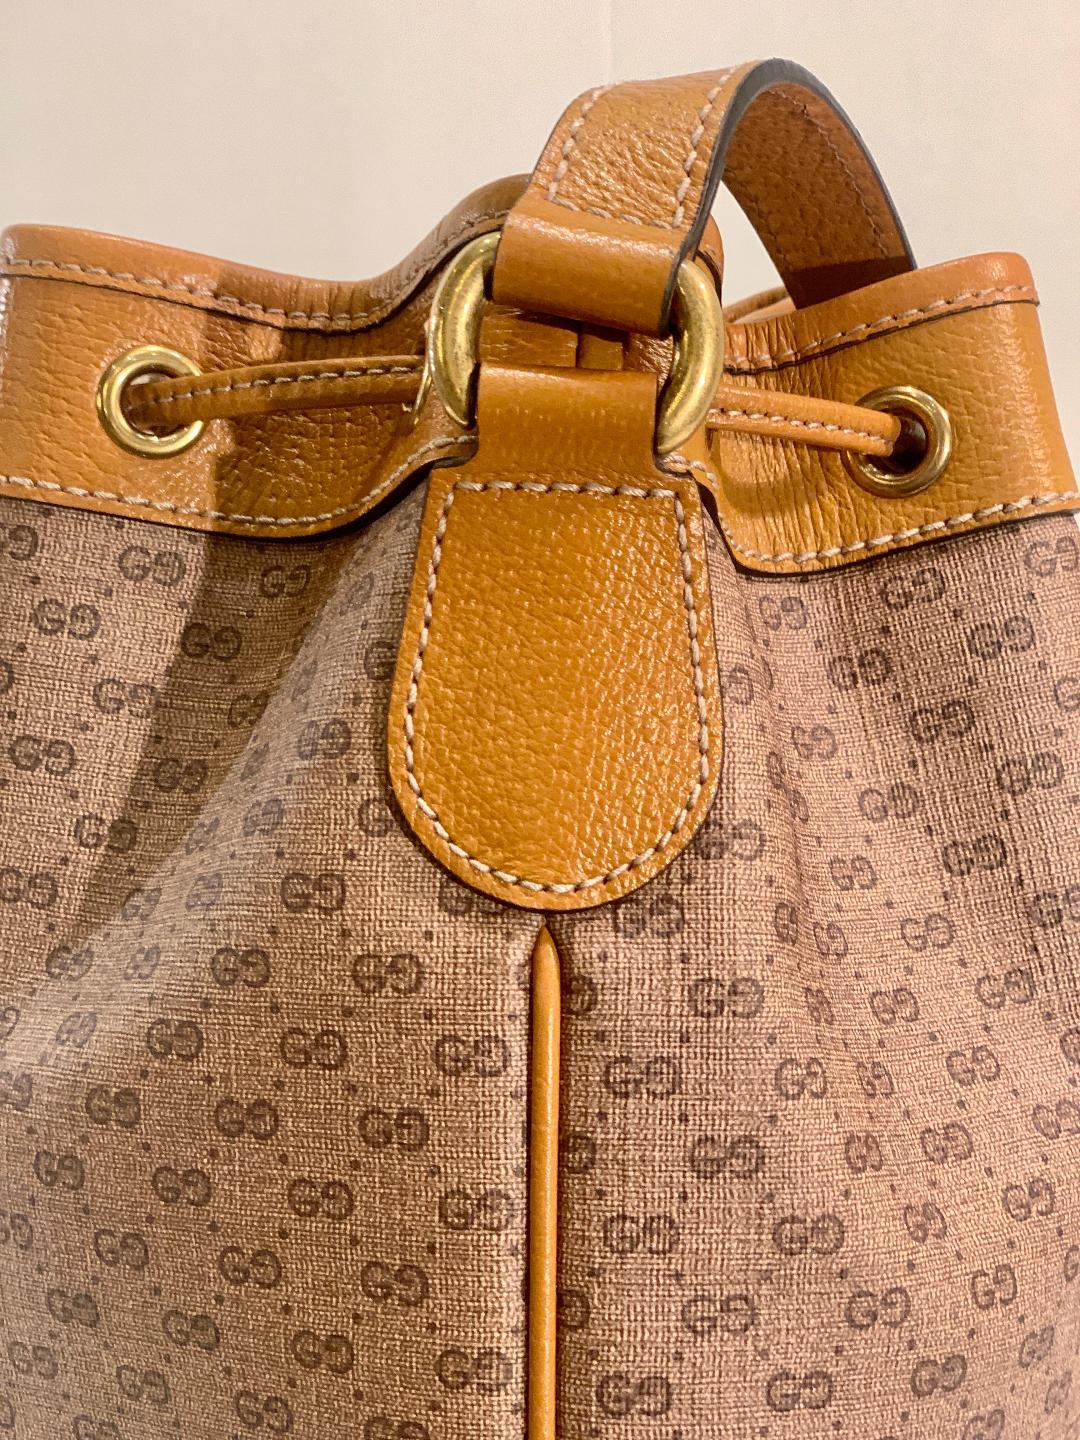 SOLD OUT Gucci Mickey Mouse Year of the Rat Bucket Bag Purse 6